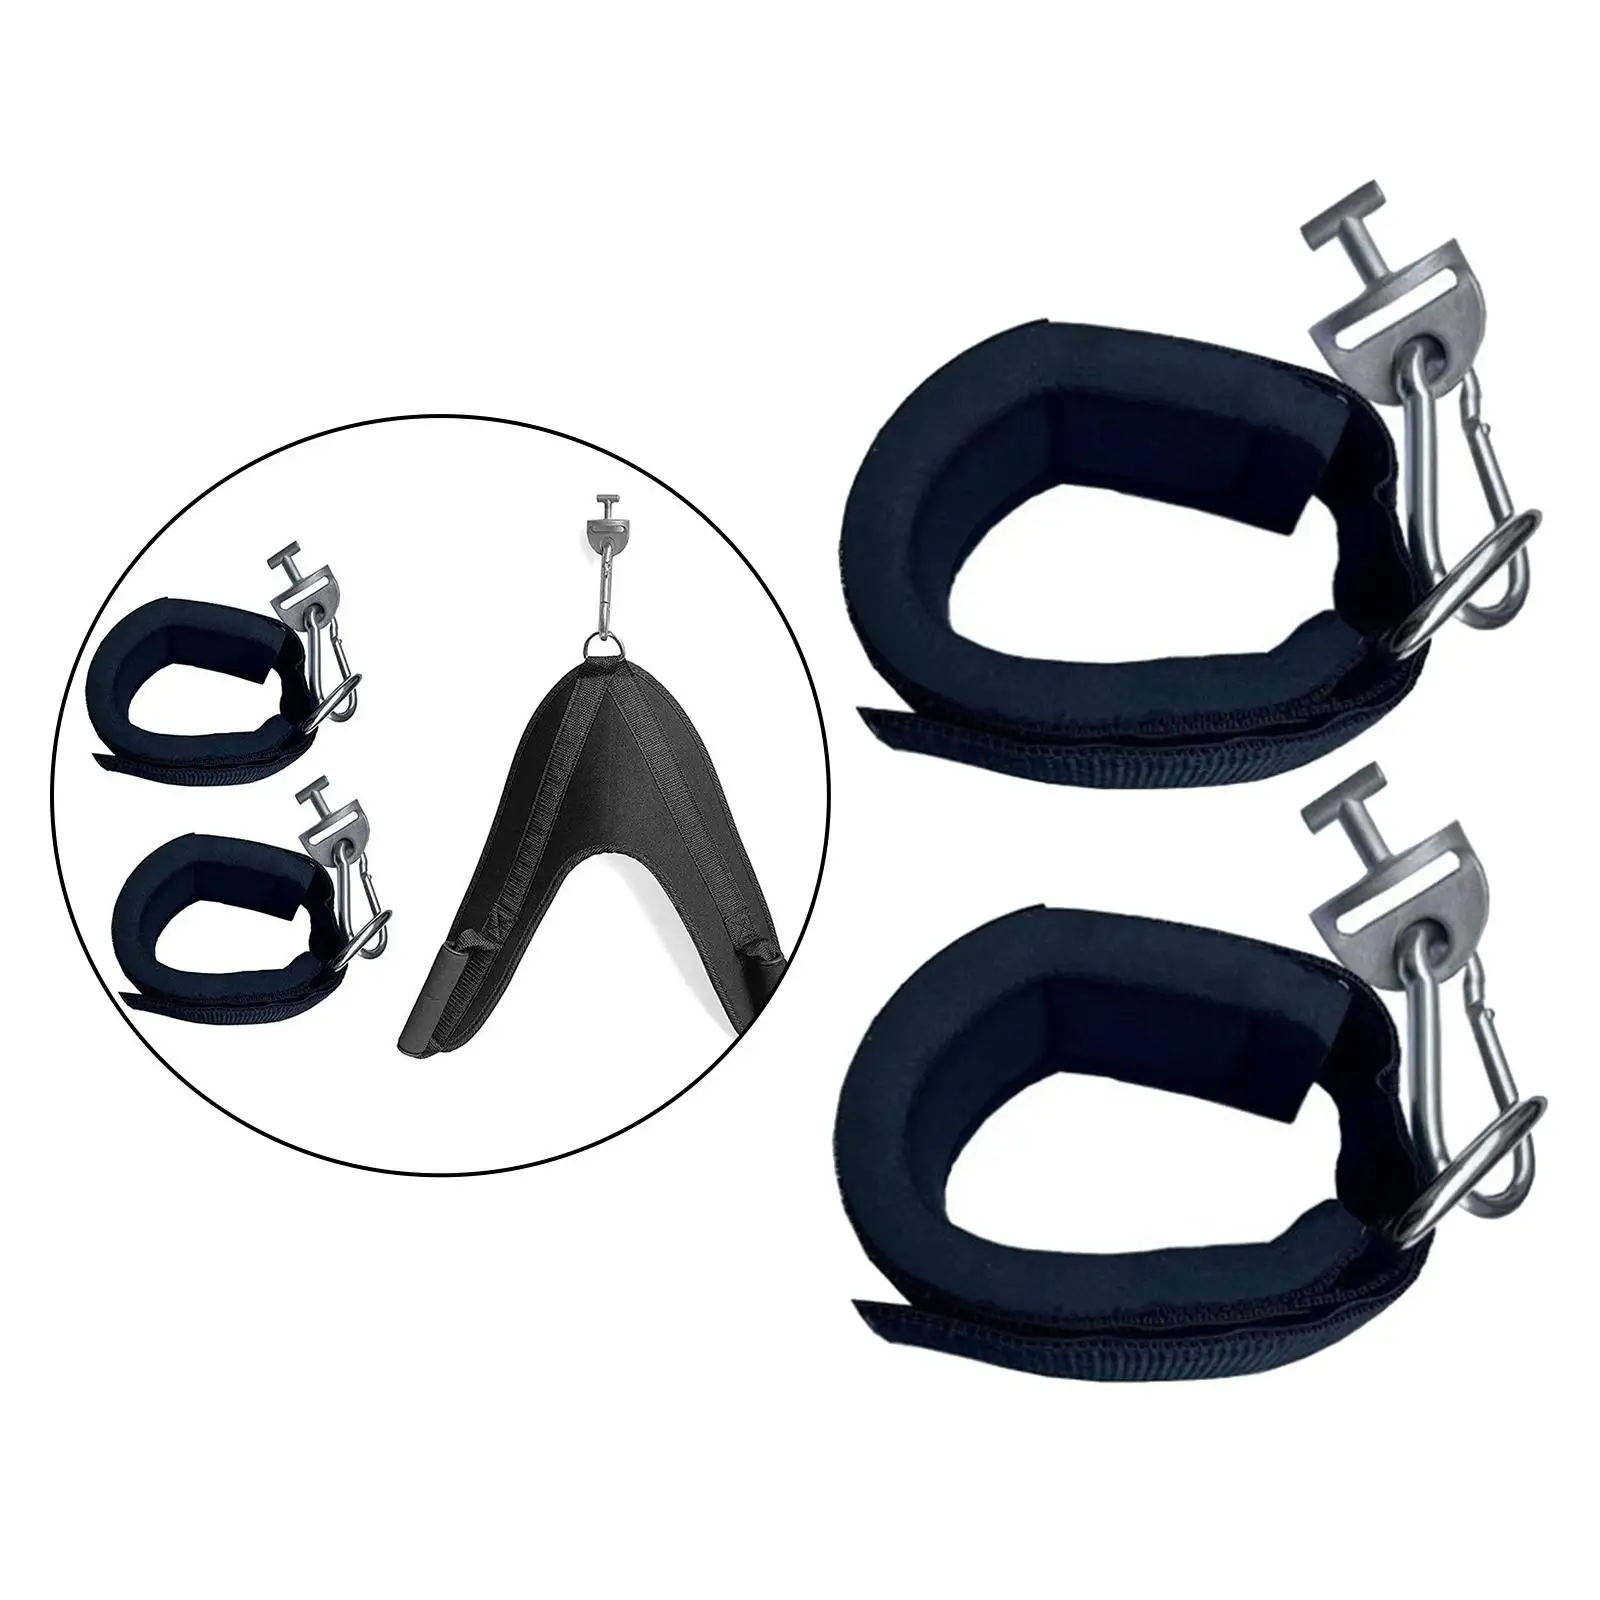 Ankle Straps for Tonal Cable Machine Foot Support Exercise Machine Attachments Ankle Cuff for Glute Kickbacks Leg Curls Home Gym